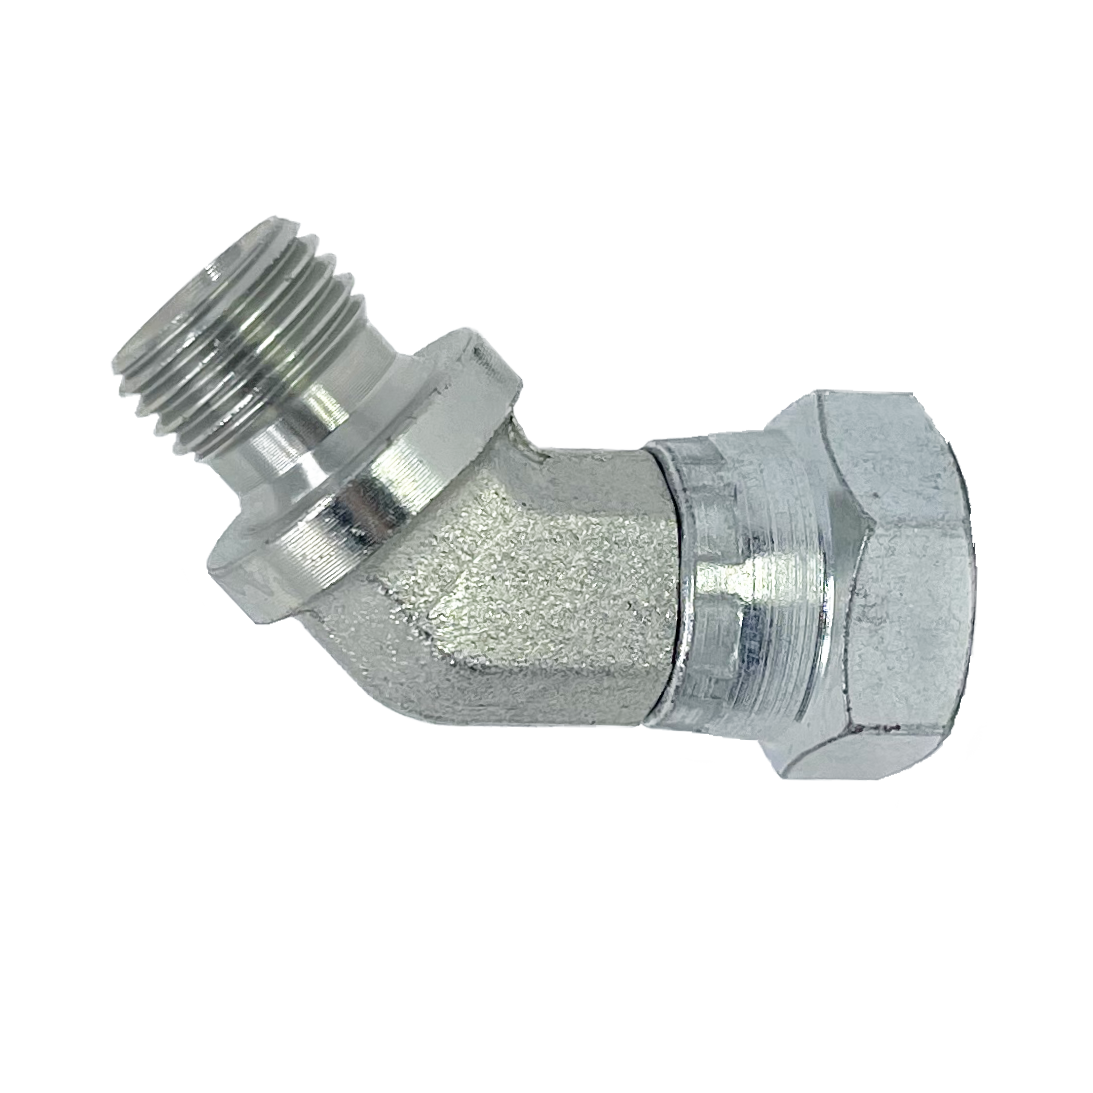 9048-12-12 : Adaptall 45-Degree Adapter, Male 0.75 (3/4") BSPP x Female 0.75 (3/4") BSPP, Carbon Steel